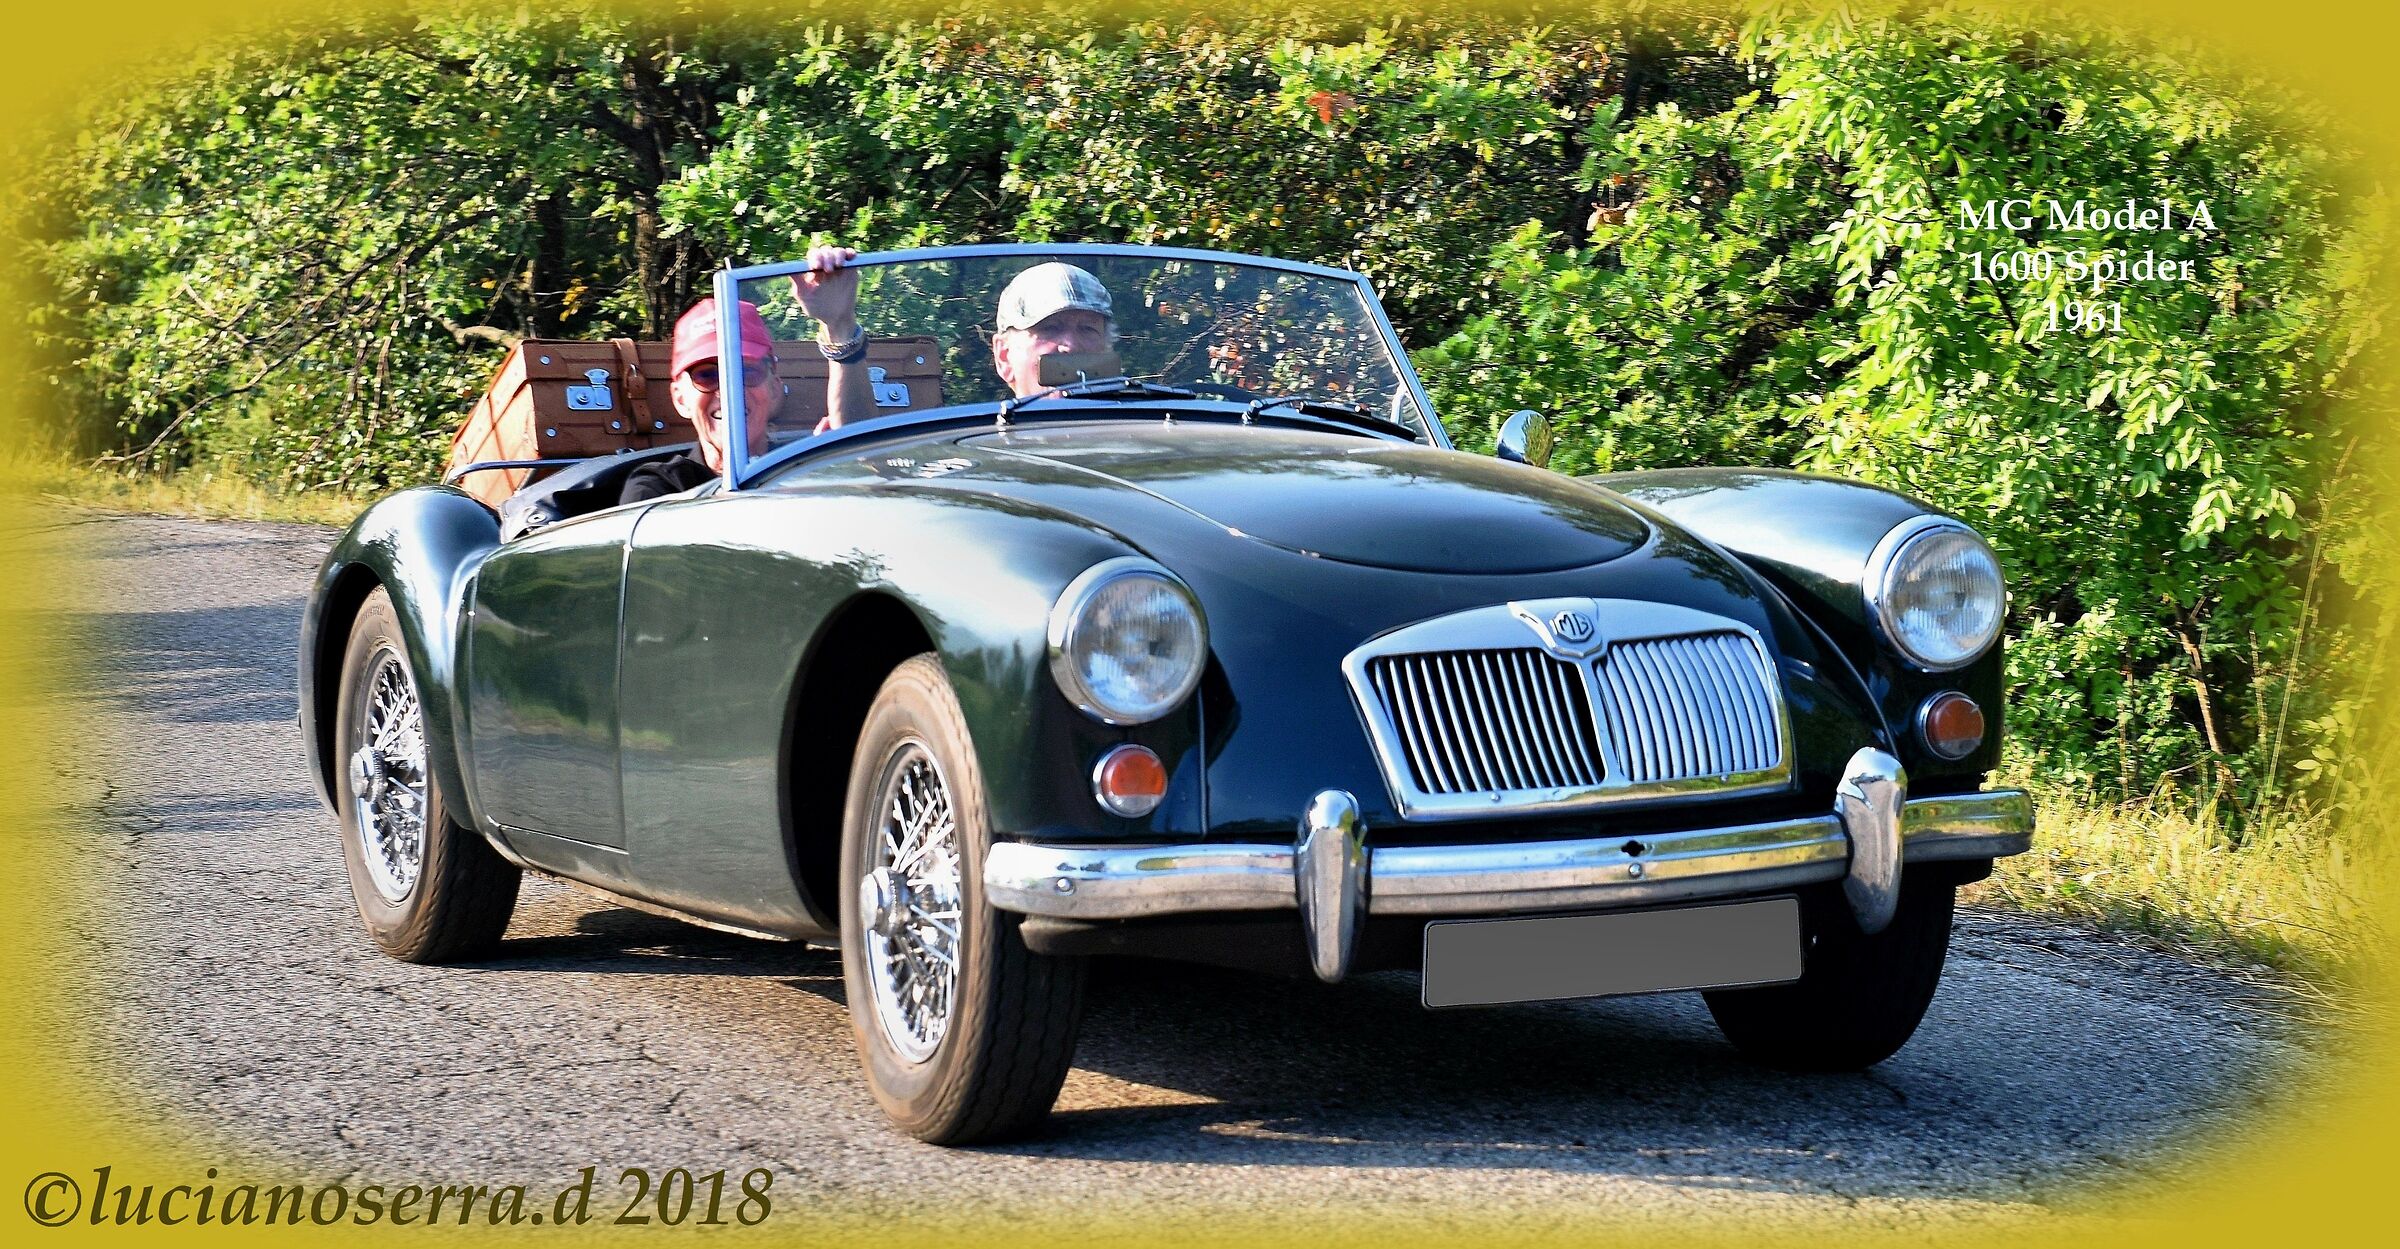 MG A 1600 Spider-1961...